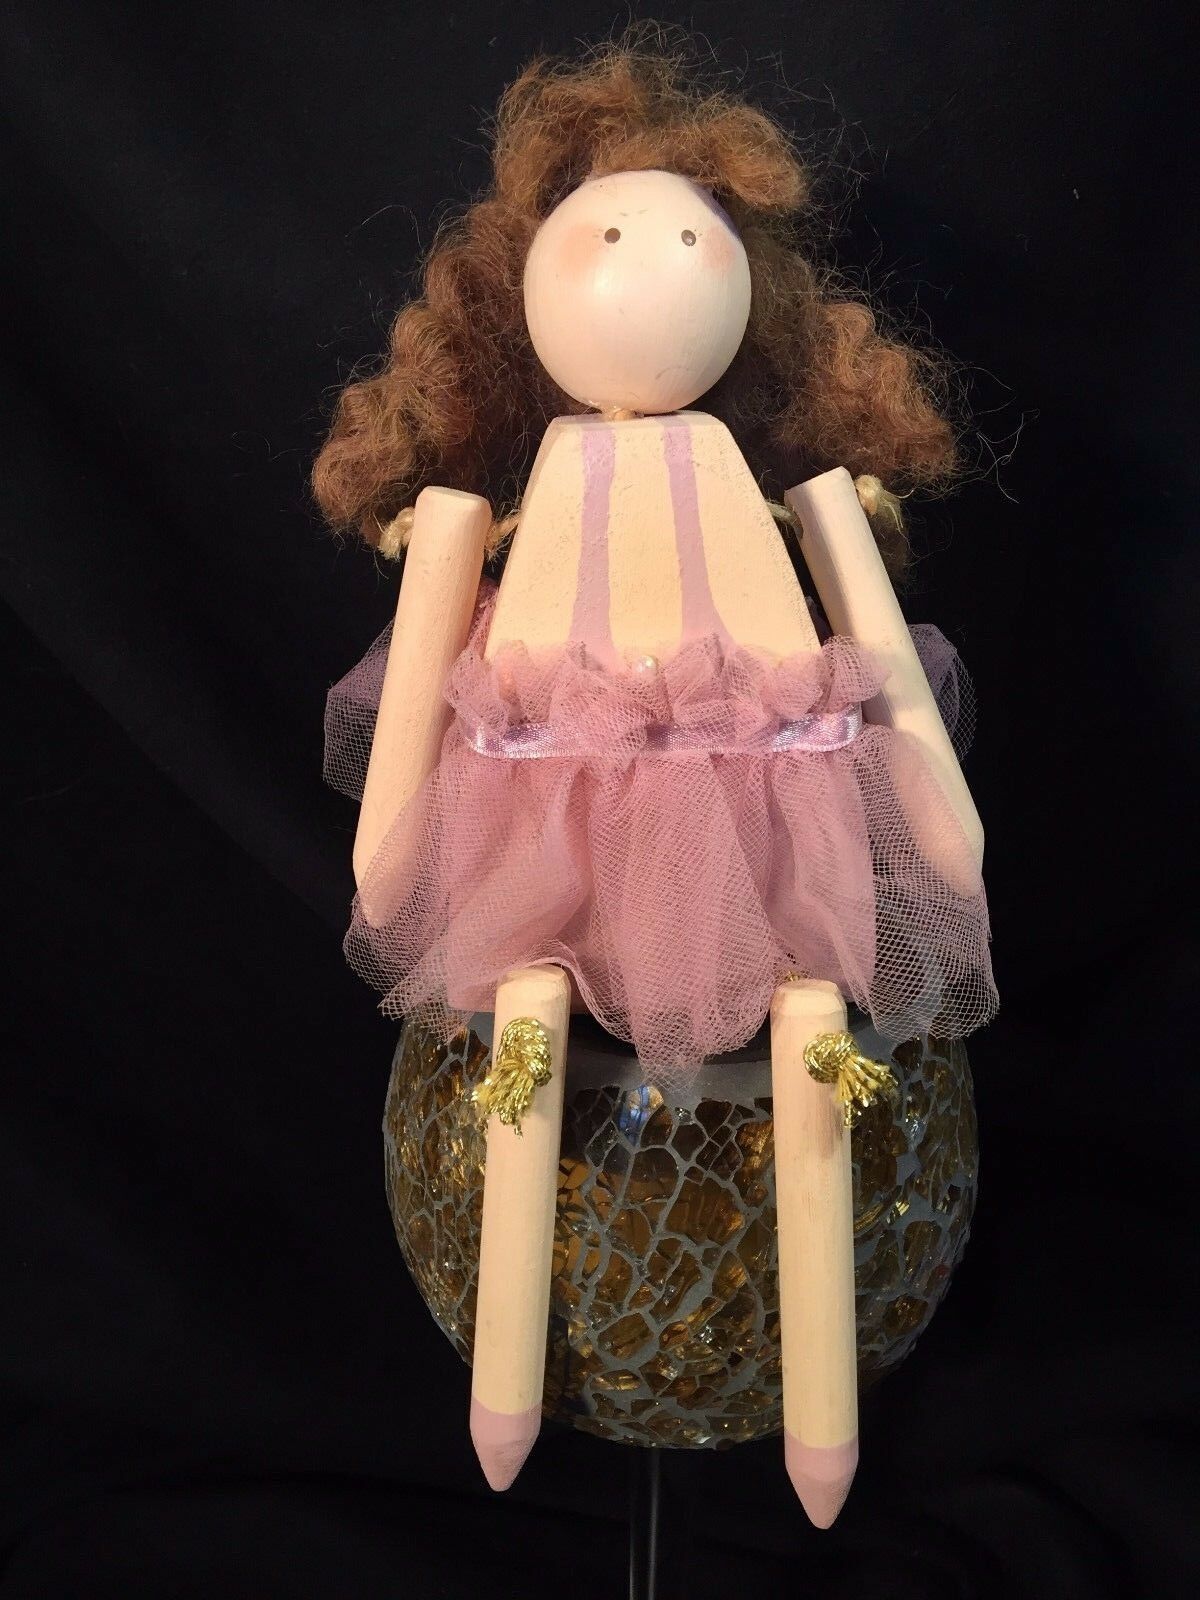 Decorative Wood Ballerina Doll, 9", Handcrafted, Hand Painted, With Pink Tutu